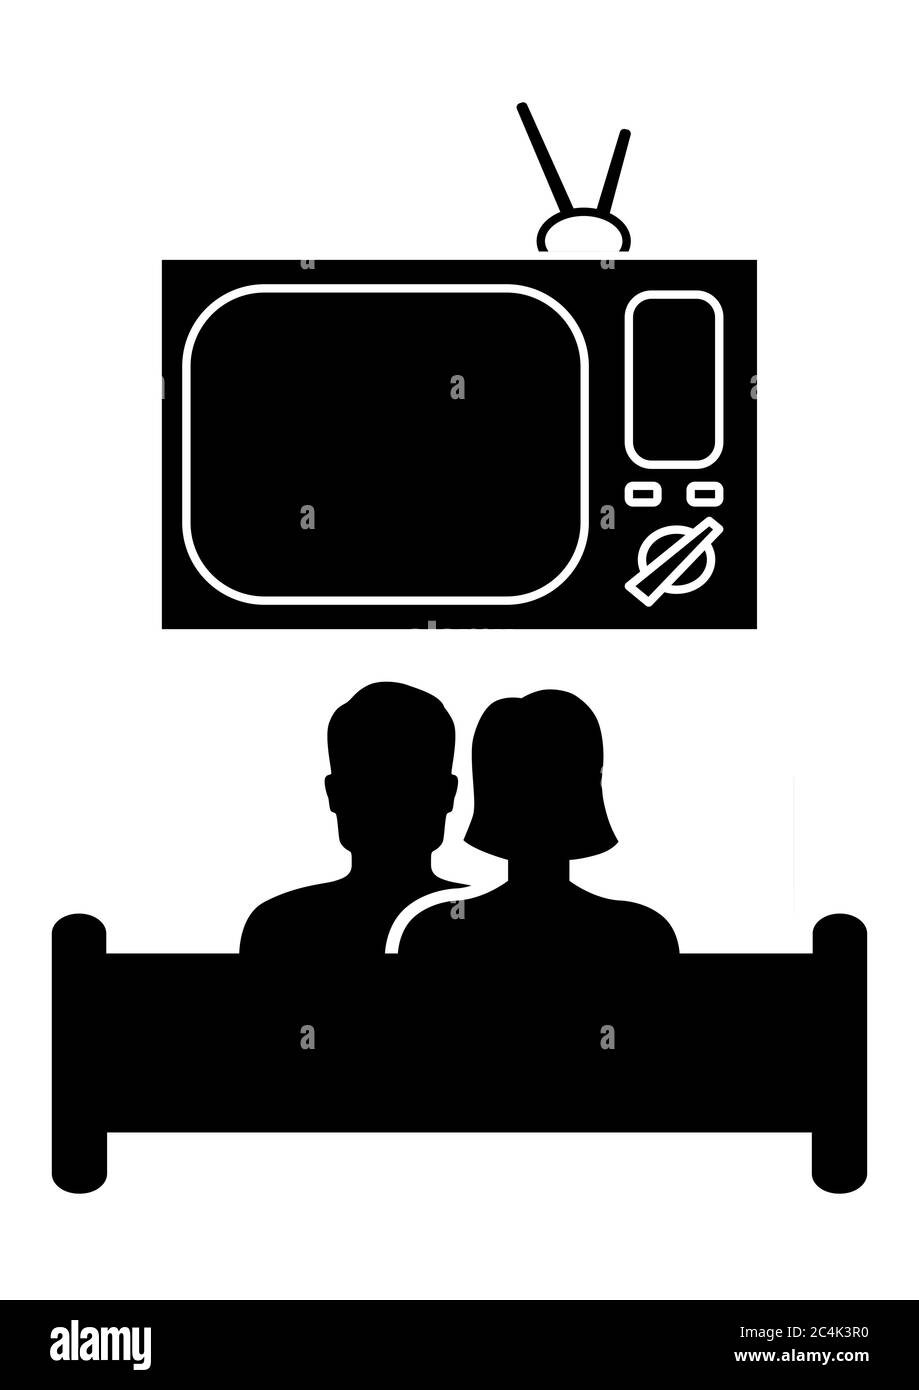 Man and woman watching TV while sitting on a sofa. Stock Vector